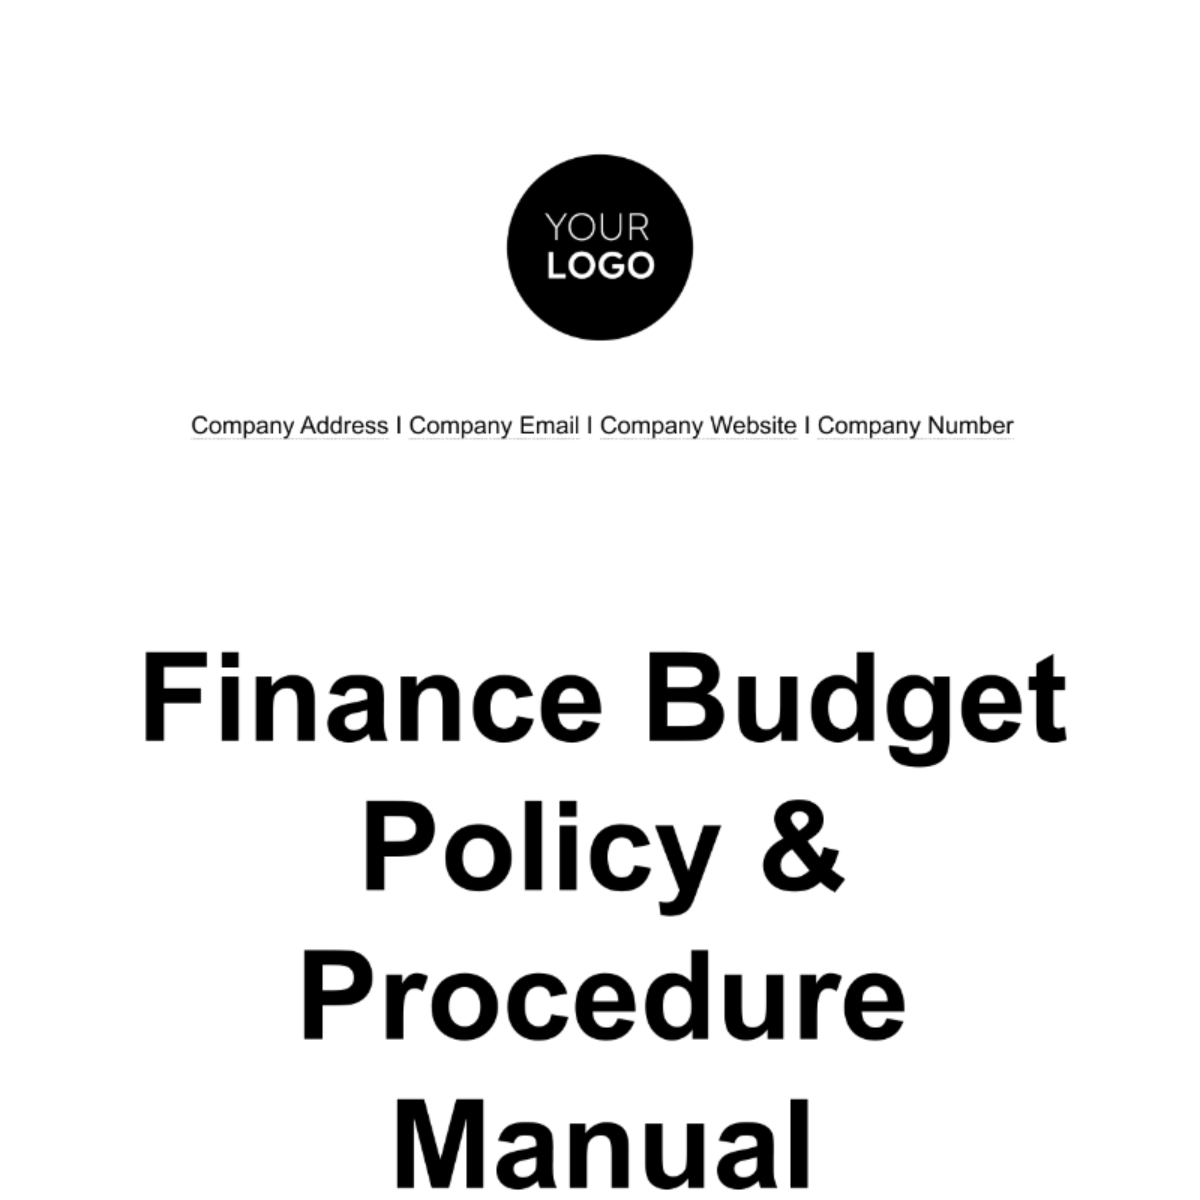 Finance Budget Policy & Procedure Manual Template